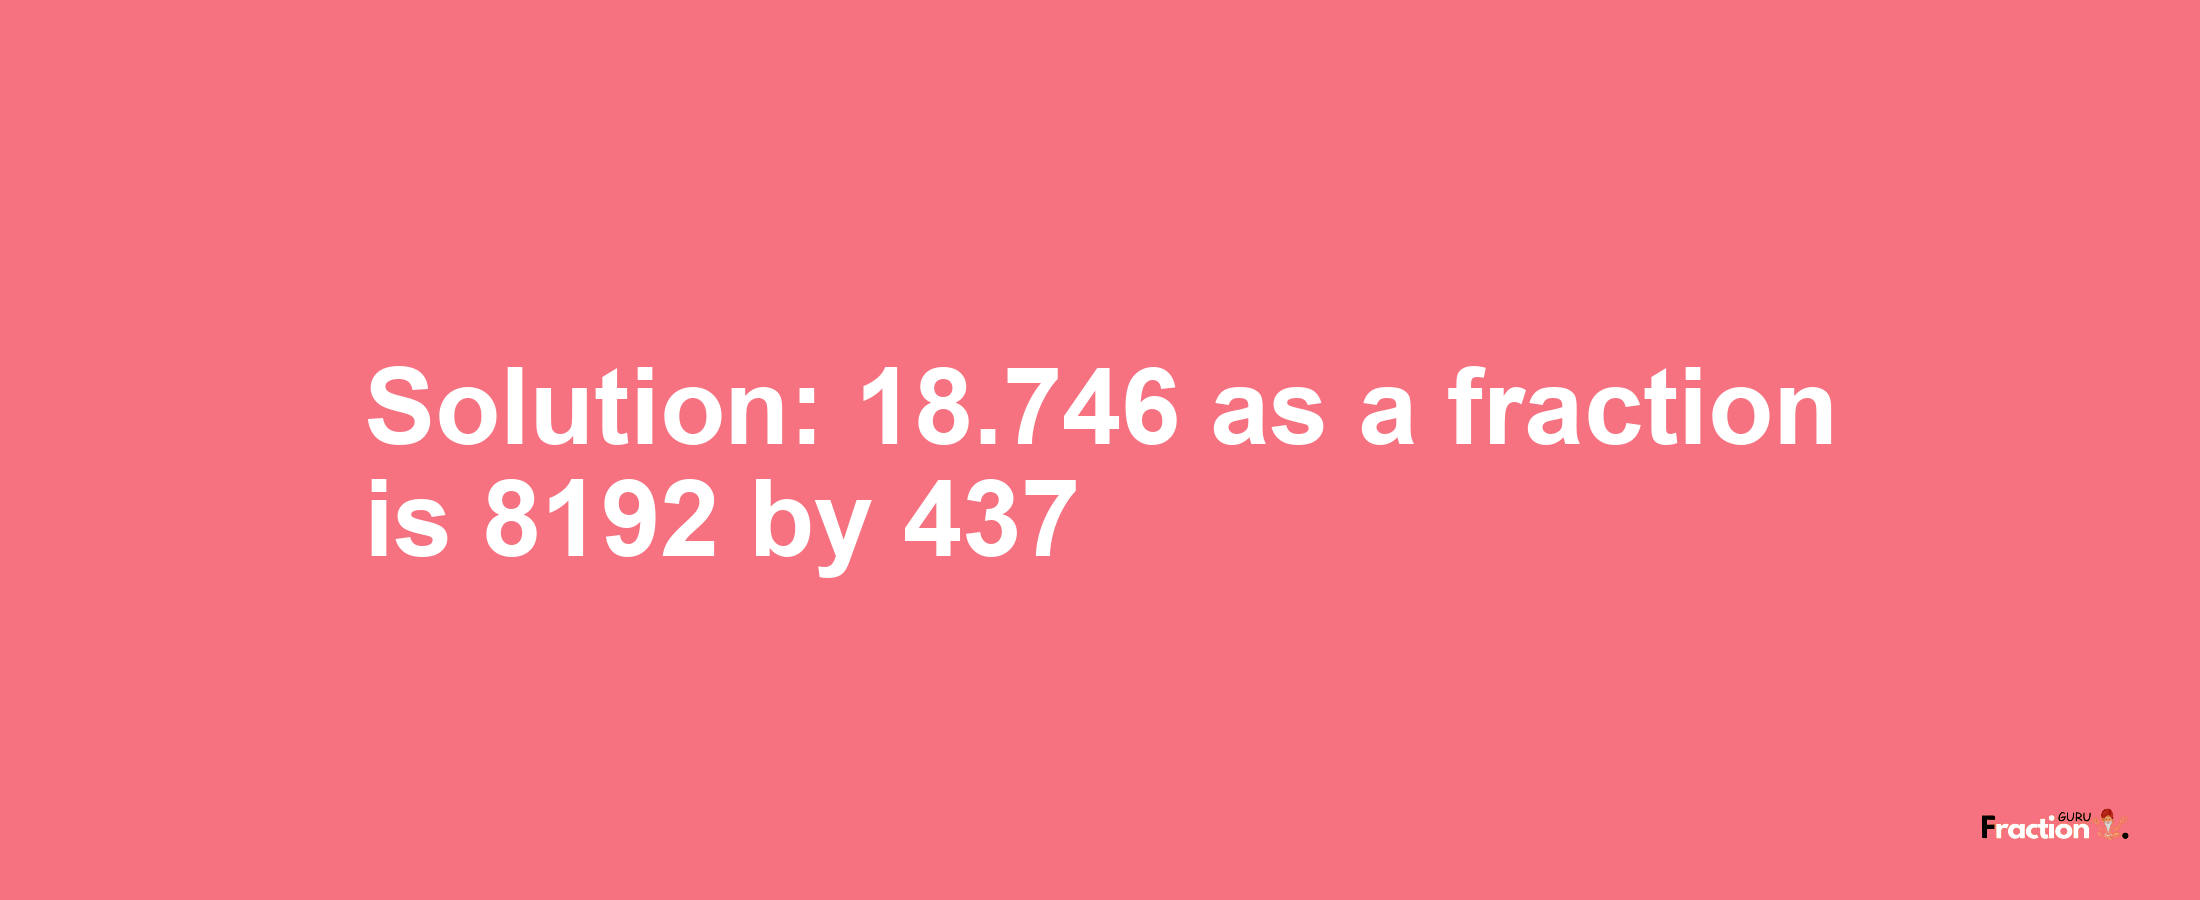 Solution:18.746 as a fraction is 8192/437